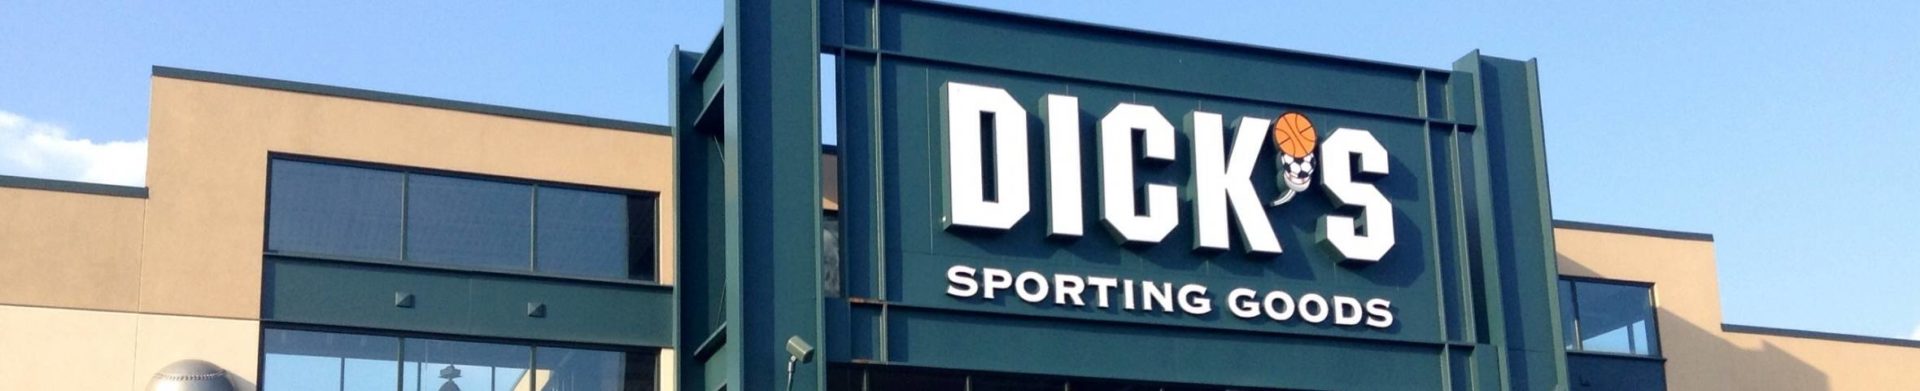 Dick's Sporting Goods storefront